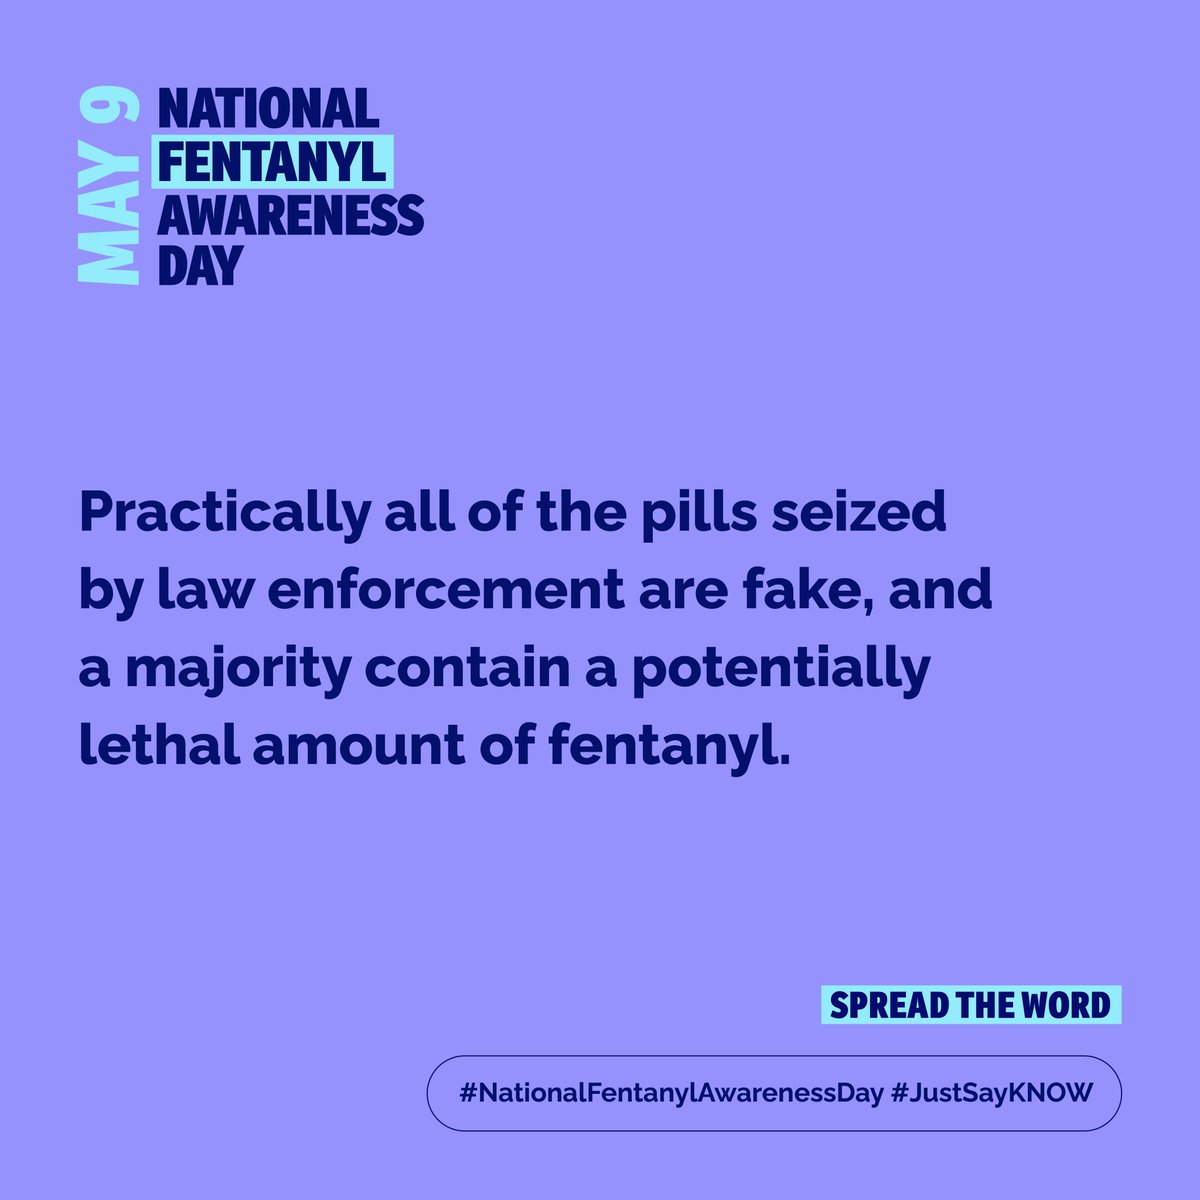 In 2022, cases handled by SNP, in conjunction with its local, state and federal partners, resulted in the seizure of over 950,000 counterfeit pills containing fentanyl, an increase of more than 425% over 2021.
#nationalfentanylawarenessday #justsayknow